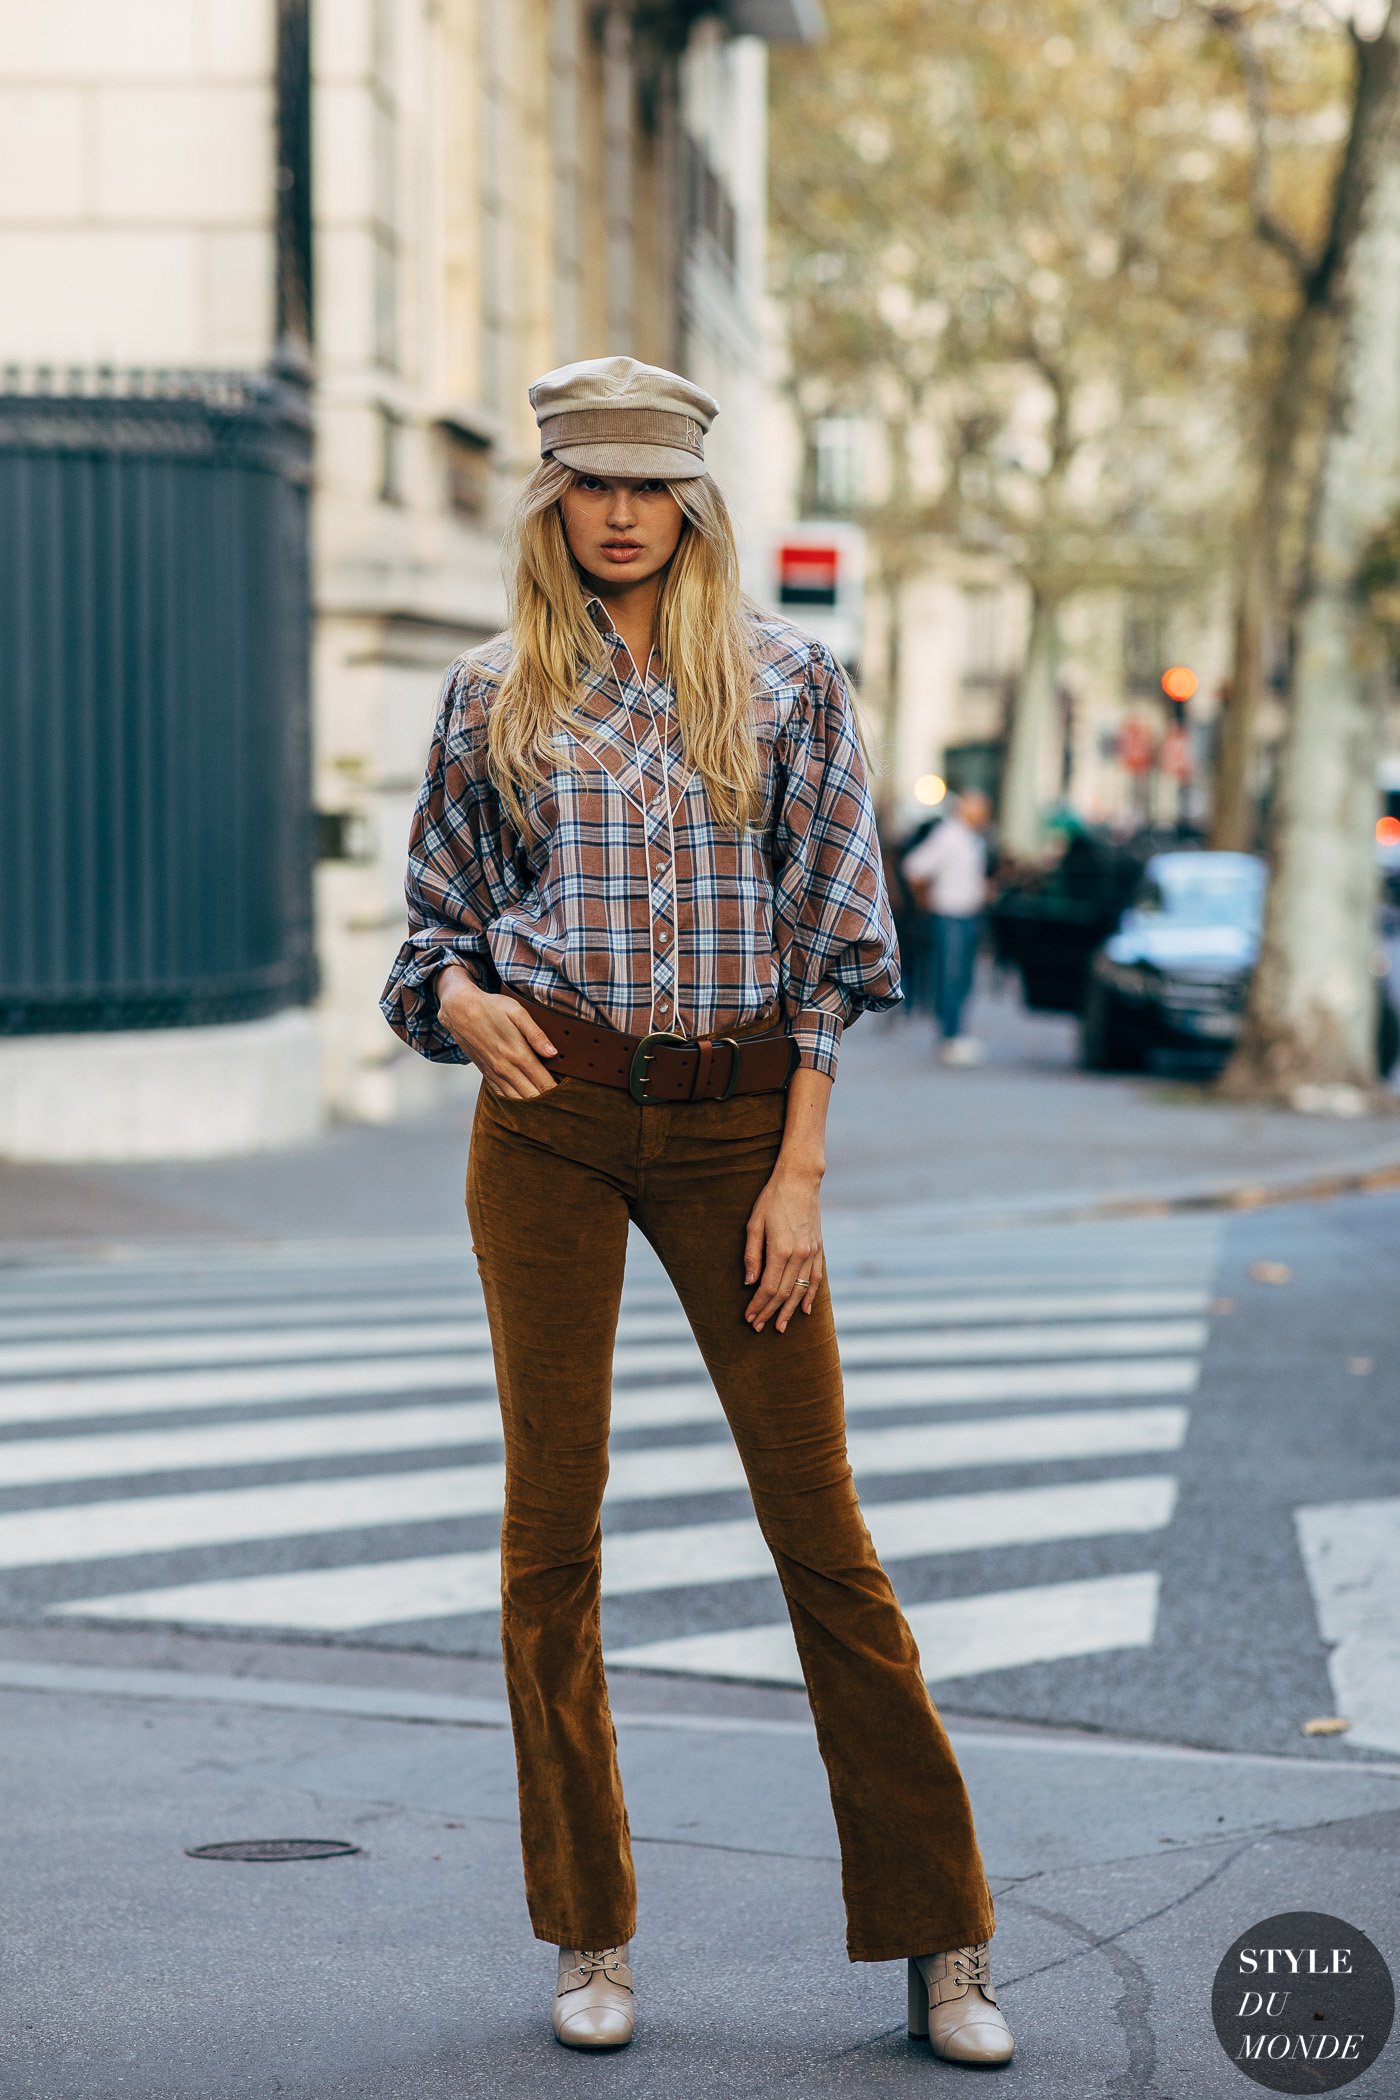 Romee-Strijd-by-STYLEDUMONDE-Street-Style-Fashion-Photography20180928_48A3808.jpg